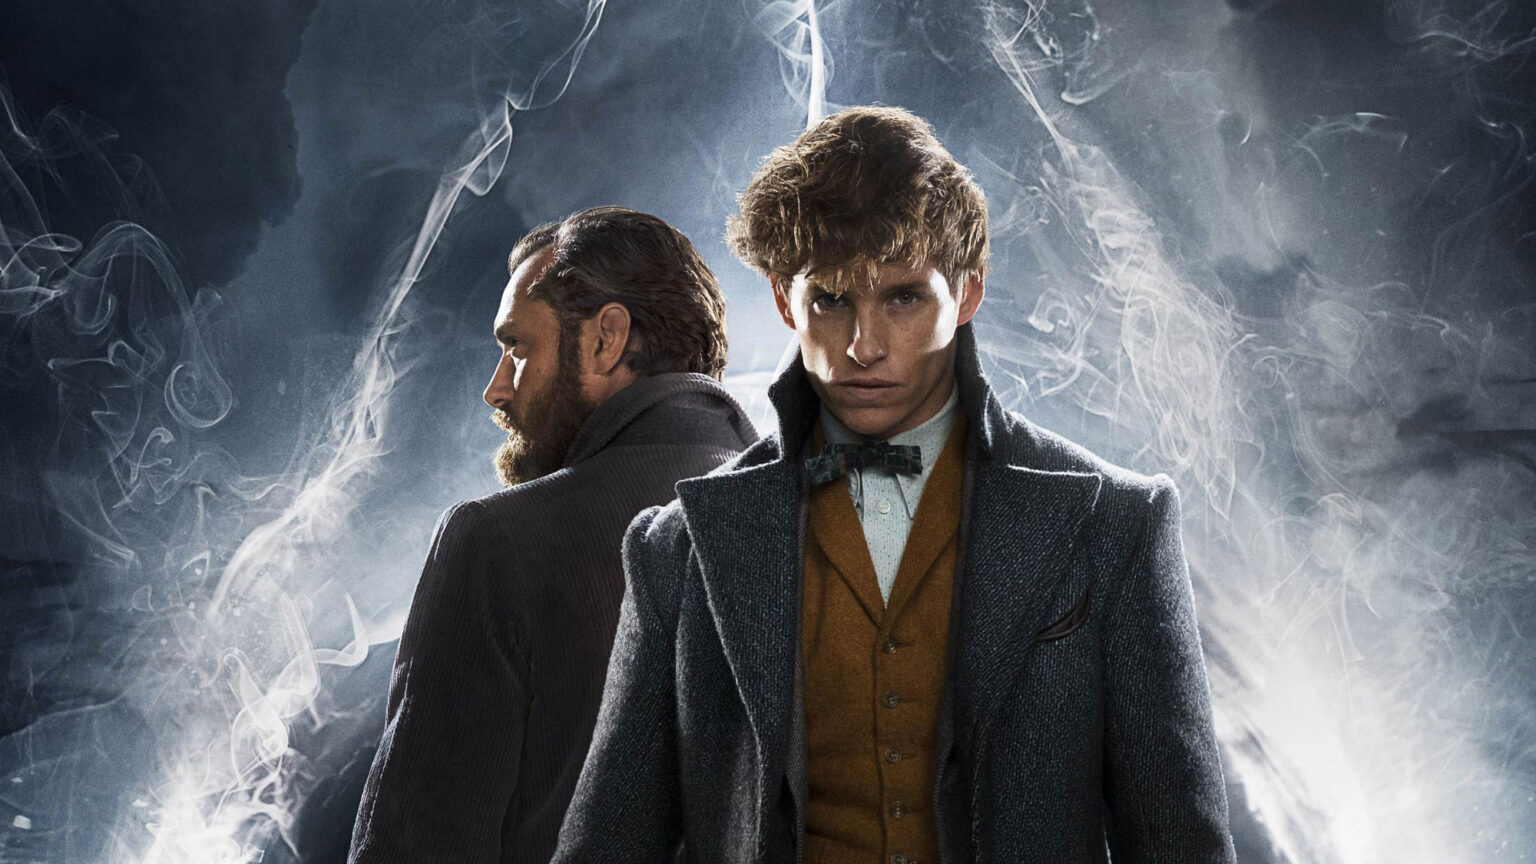 When is 'Fantastic Beasts: The Secrets of Dumbledore' available to stream? Here's how you can watch the film online for free.